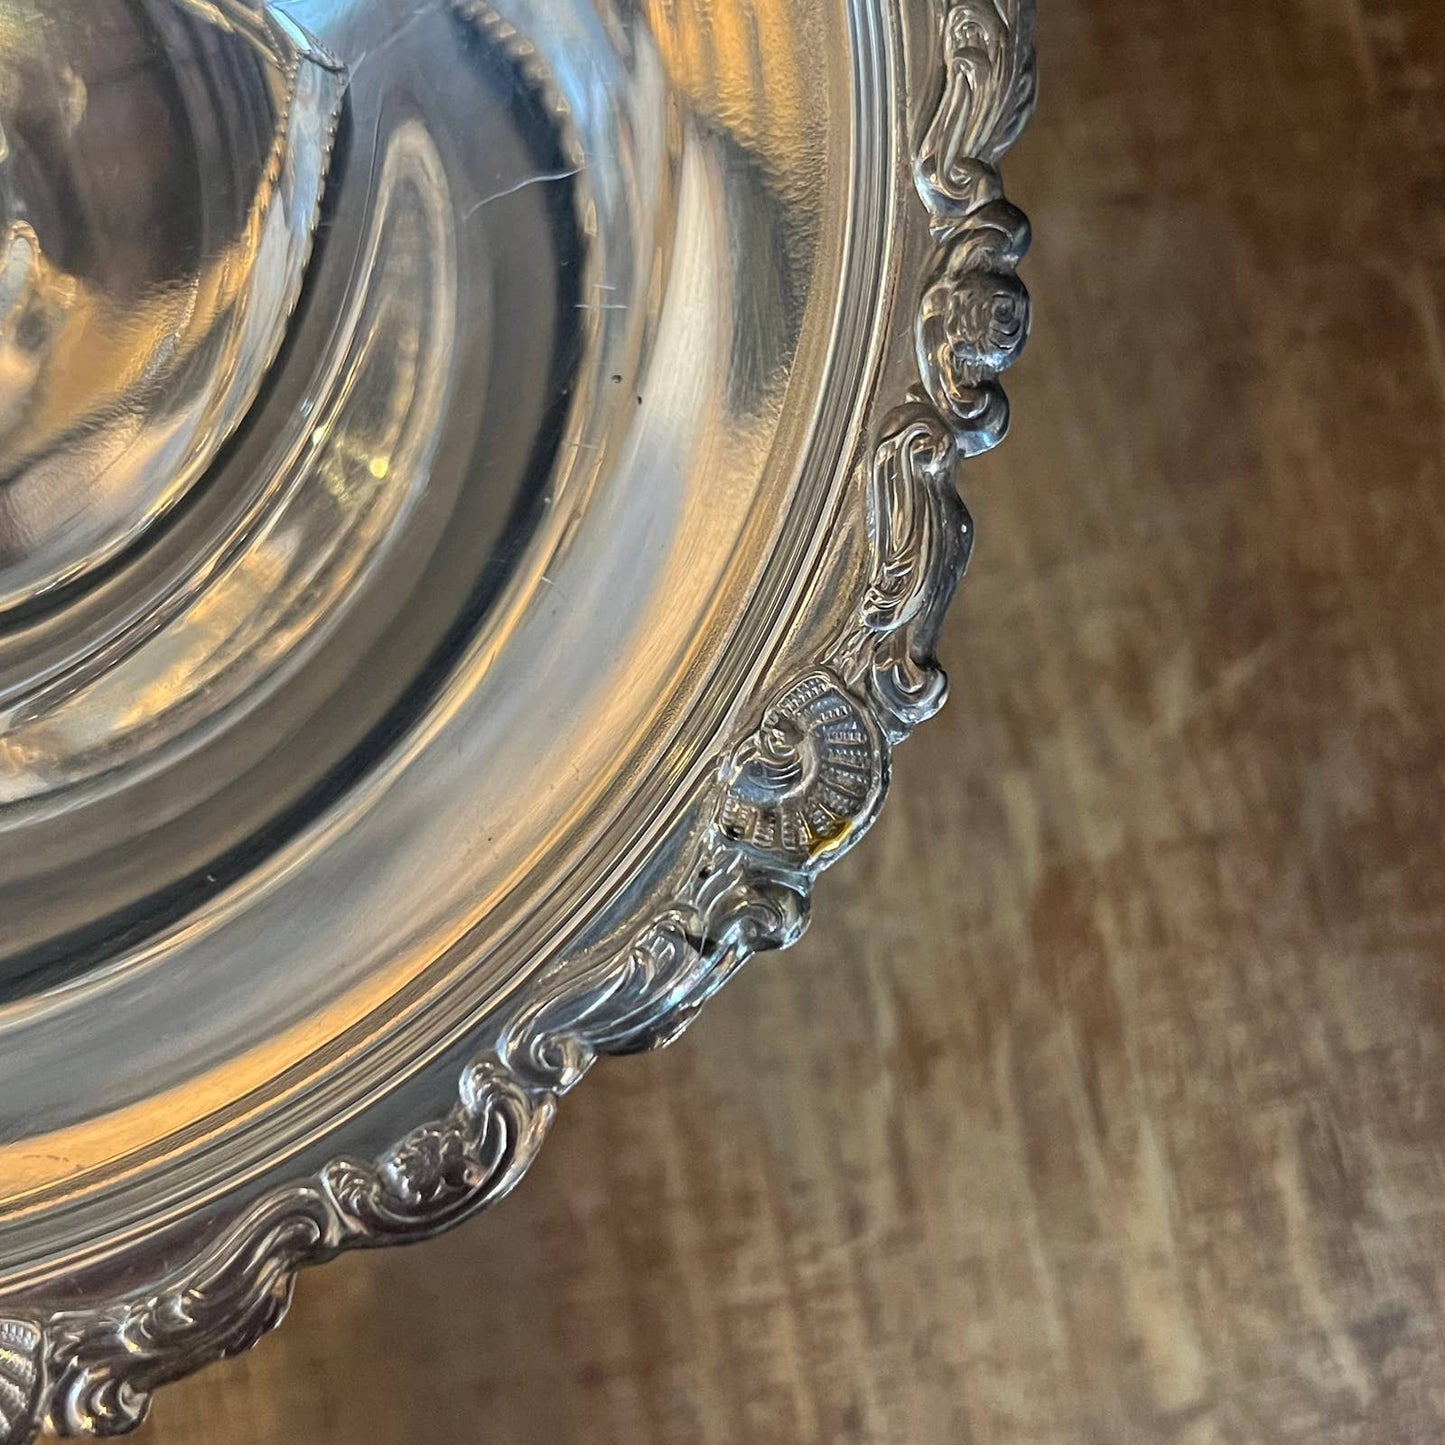 Vintage Sheridan silver plated compote pedestal dish